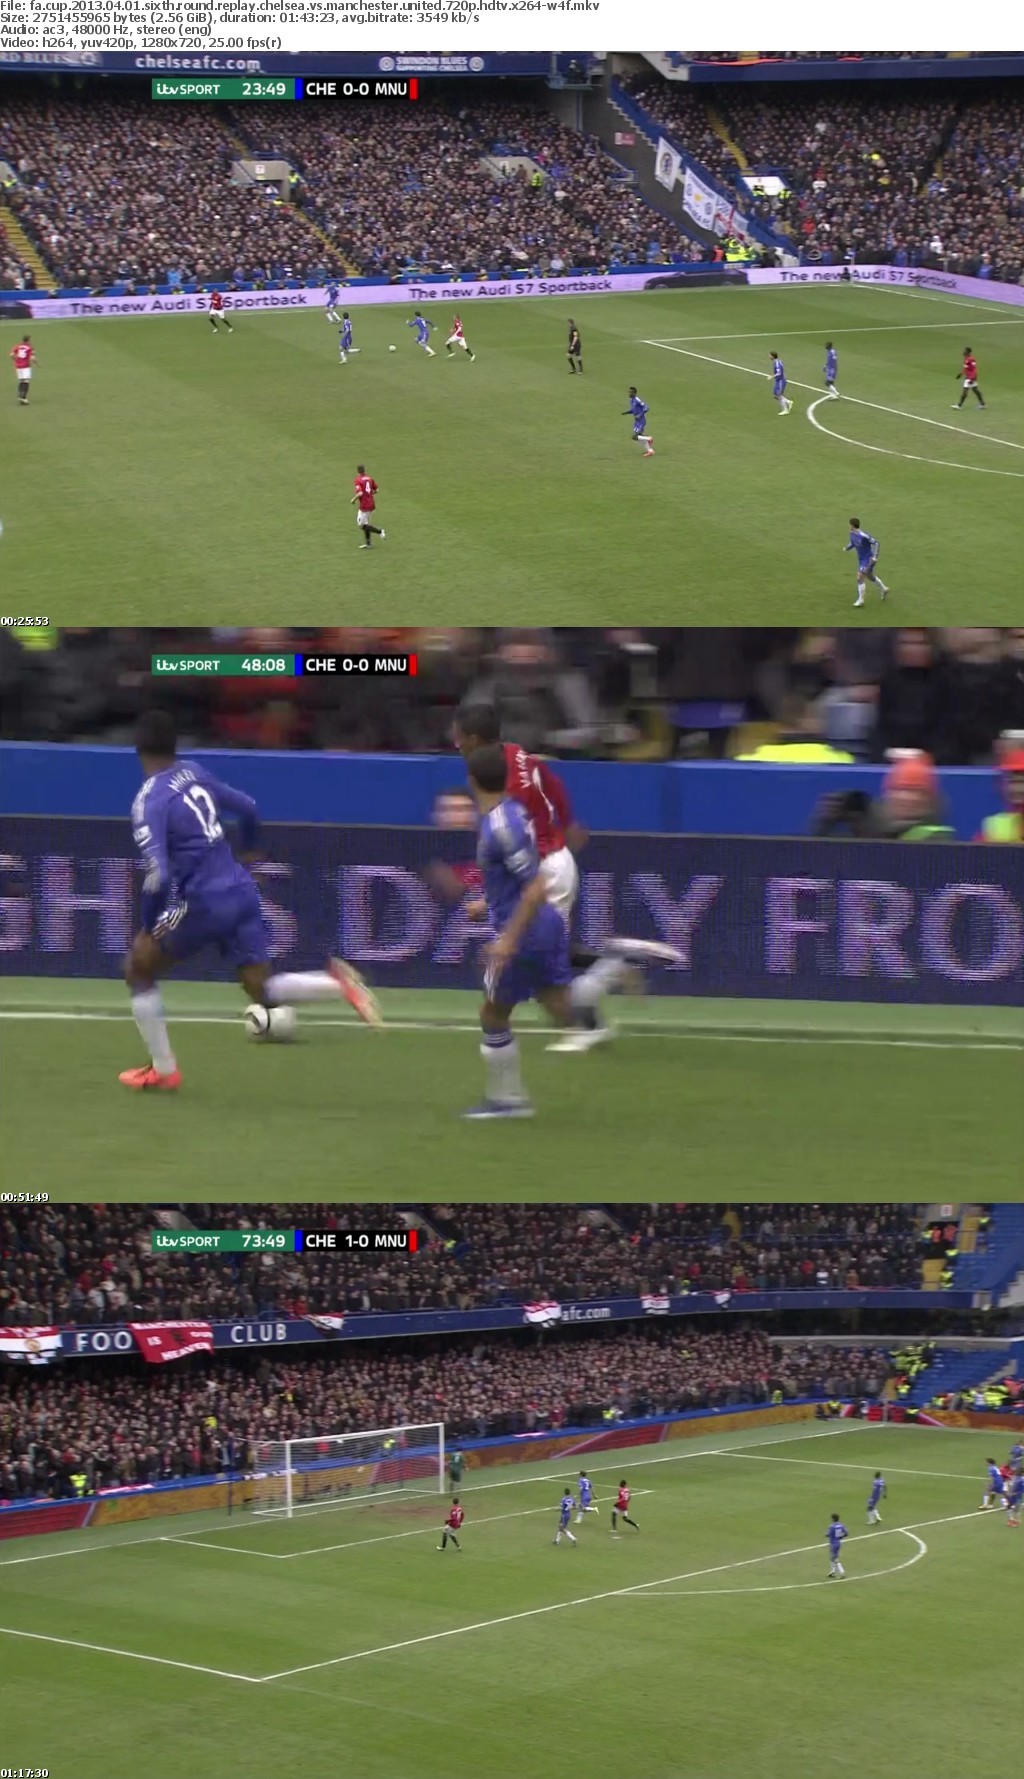 FA Cup 2013 04 01 Sixth Round Replay Chelsea Vs Manchester United 720p HDTV x264W4F